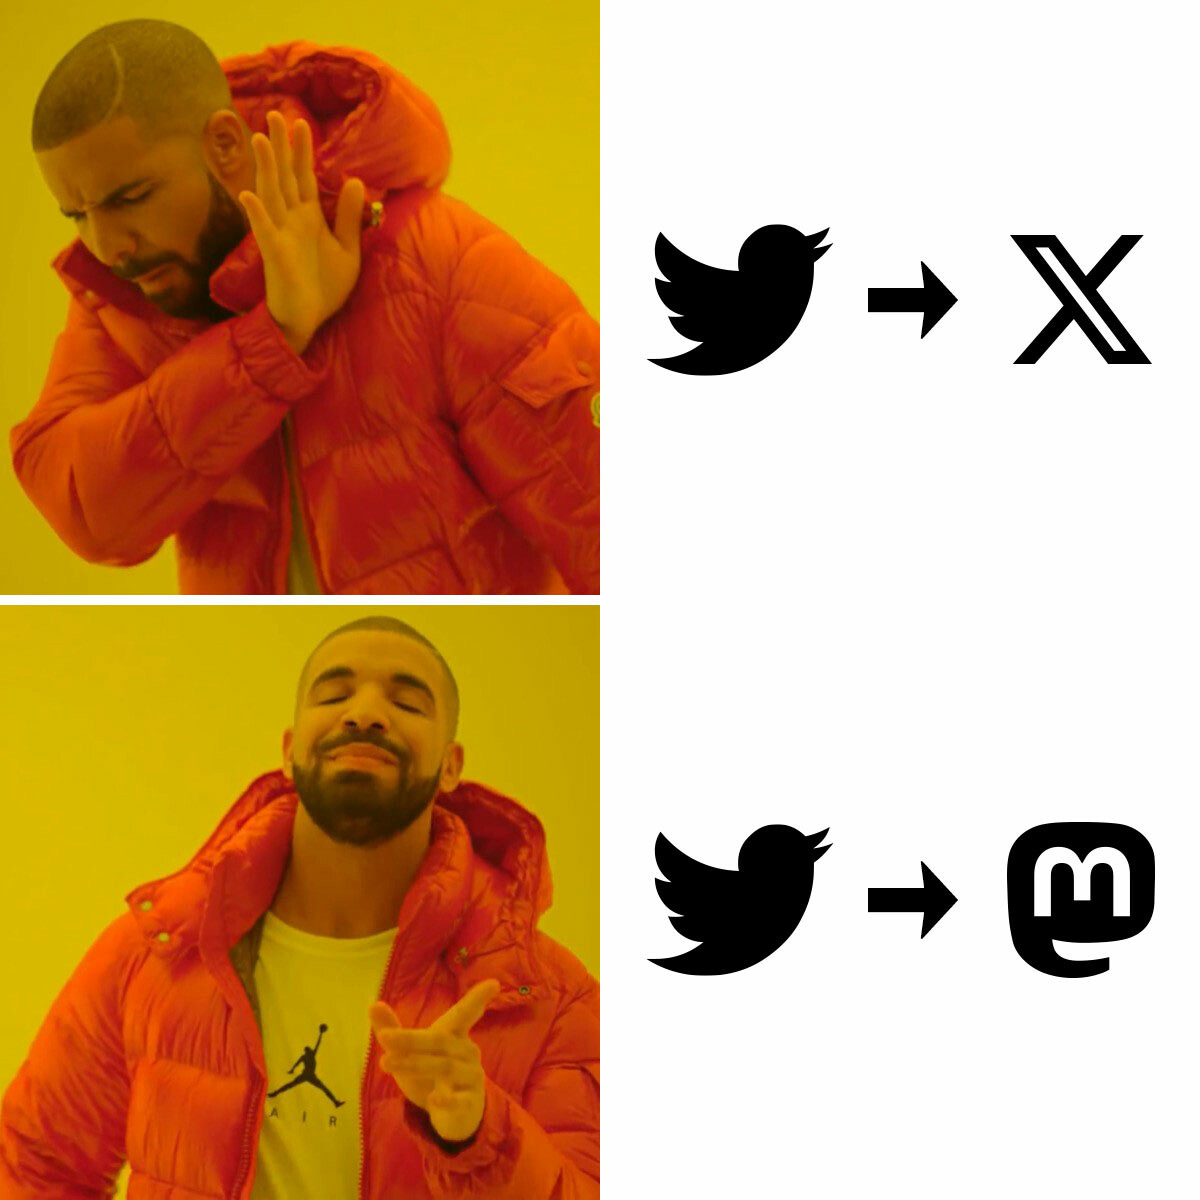 Drake meme:

In the upper segment, Drake is repelled by the old Twitter icon being replaced by the new “X” icon.

In the lower segment, Drake approves of the old Twitter icon being replaced by a Mastodon icon.